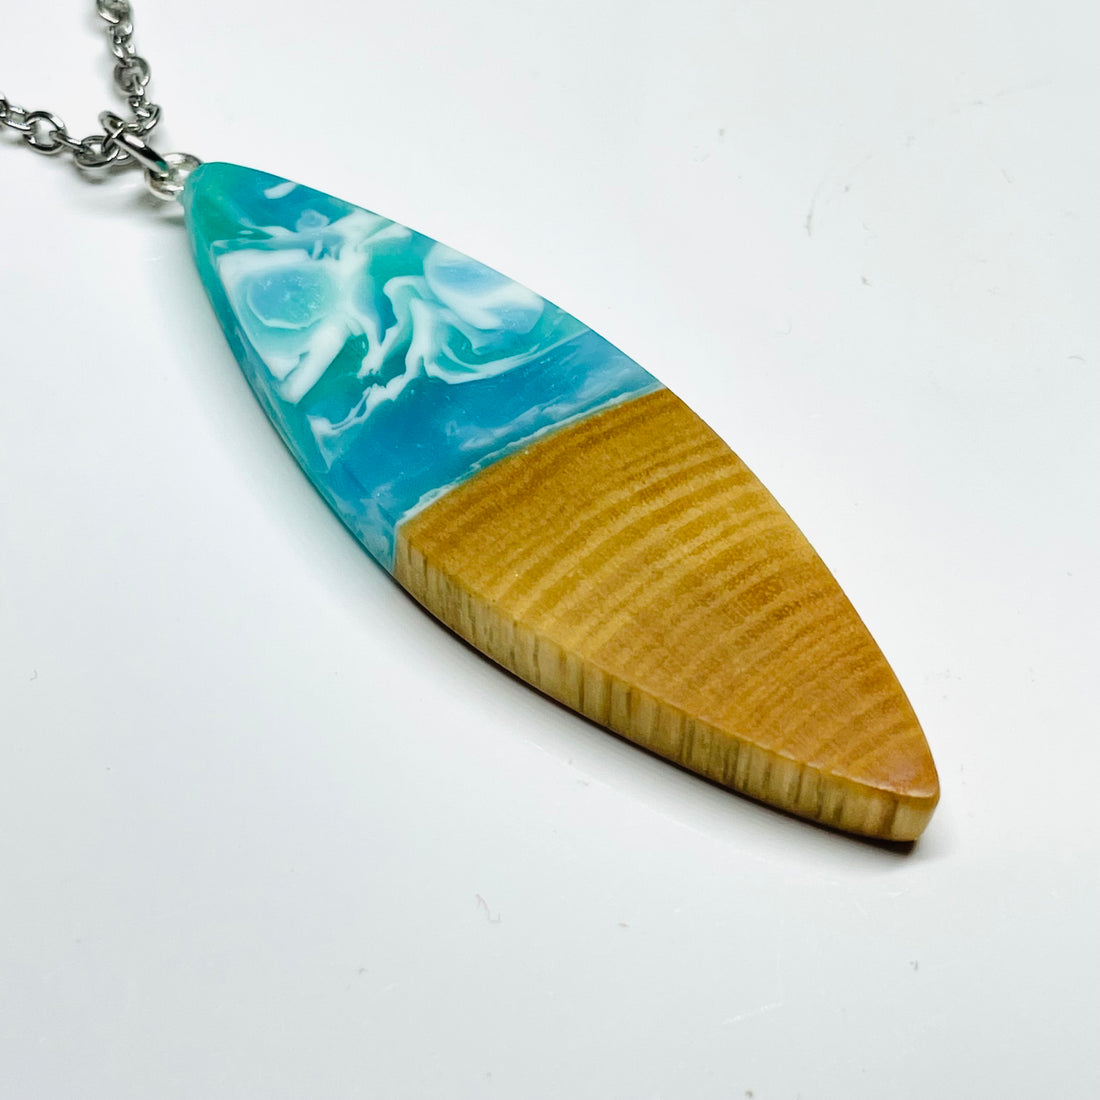 Handmade pendant/necklace from spalted maple wood with&nbsp;green, blue&nbsp;and white resin.